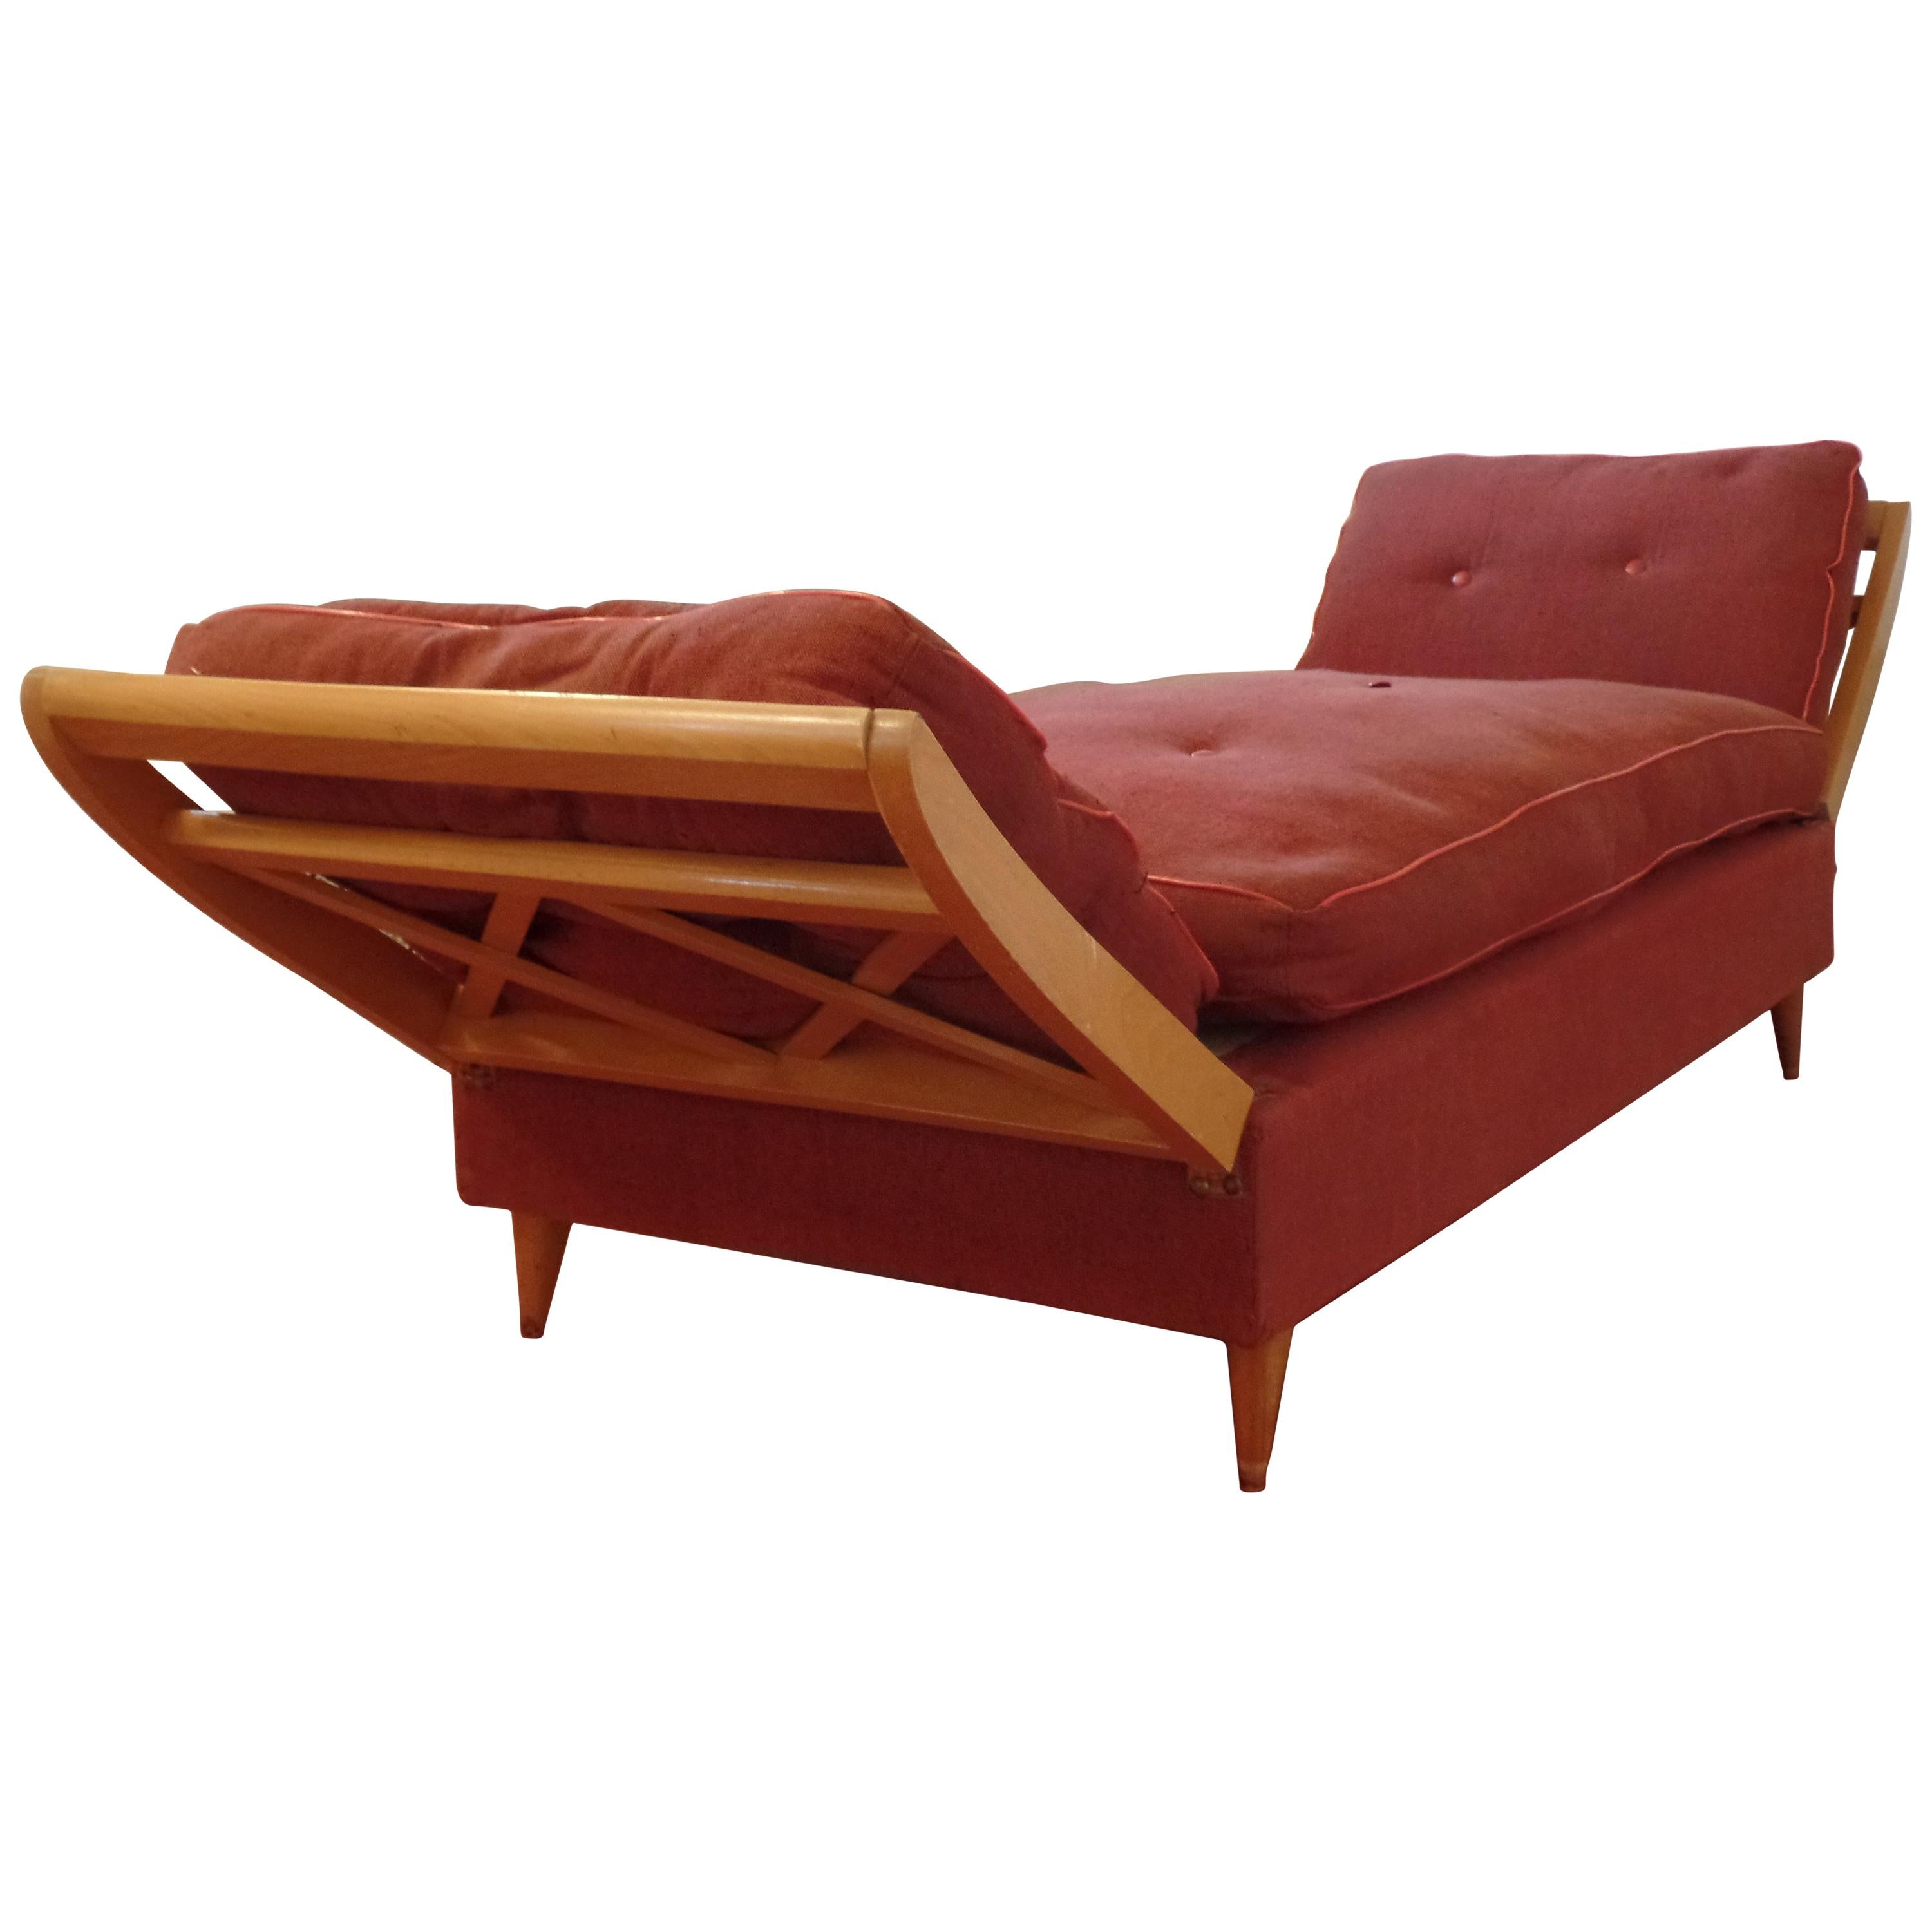 French Mid-Century Modern Neoclassical Sofa or Day Bed